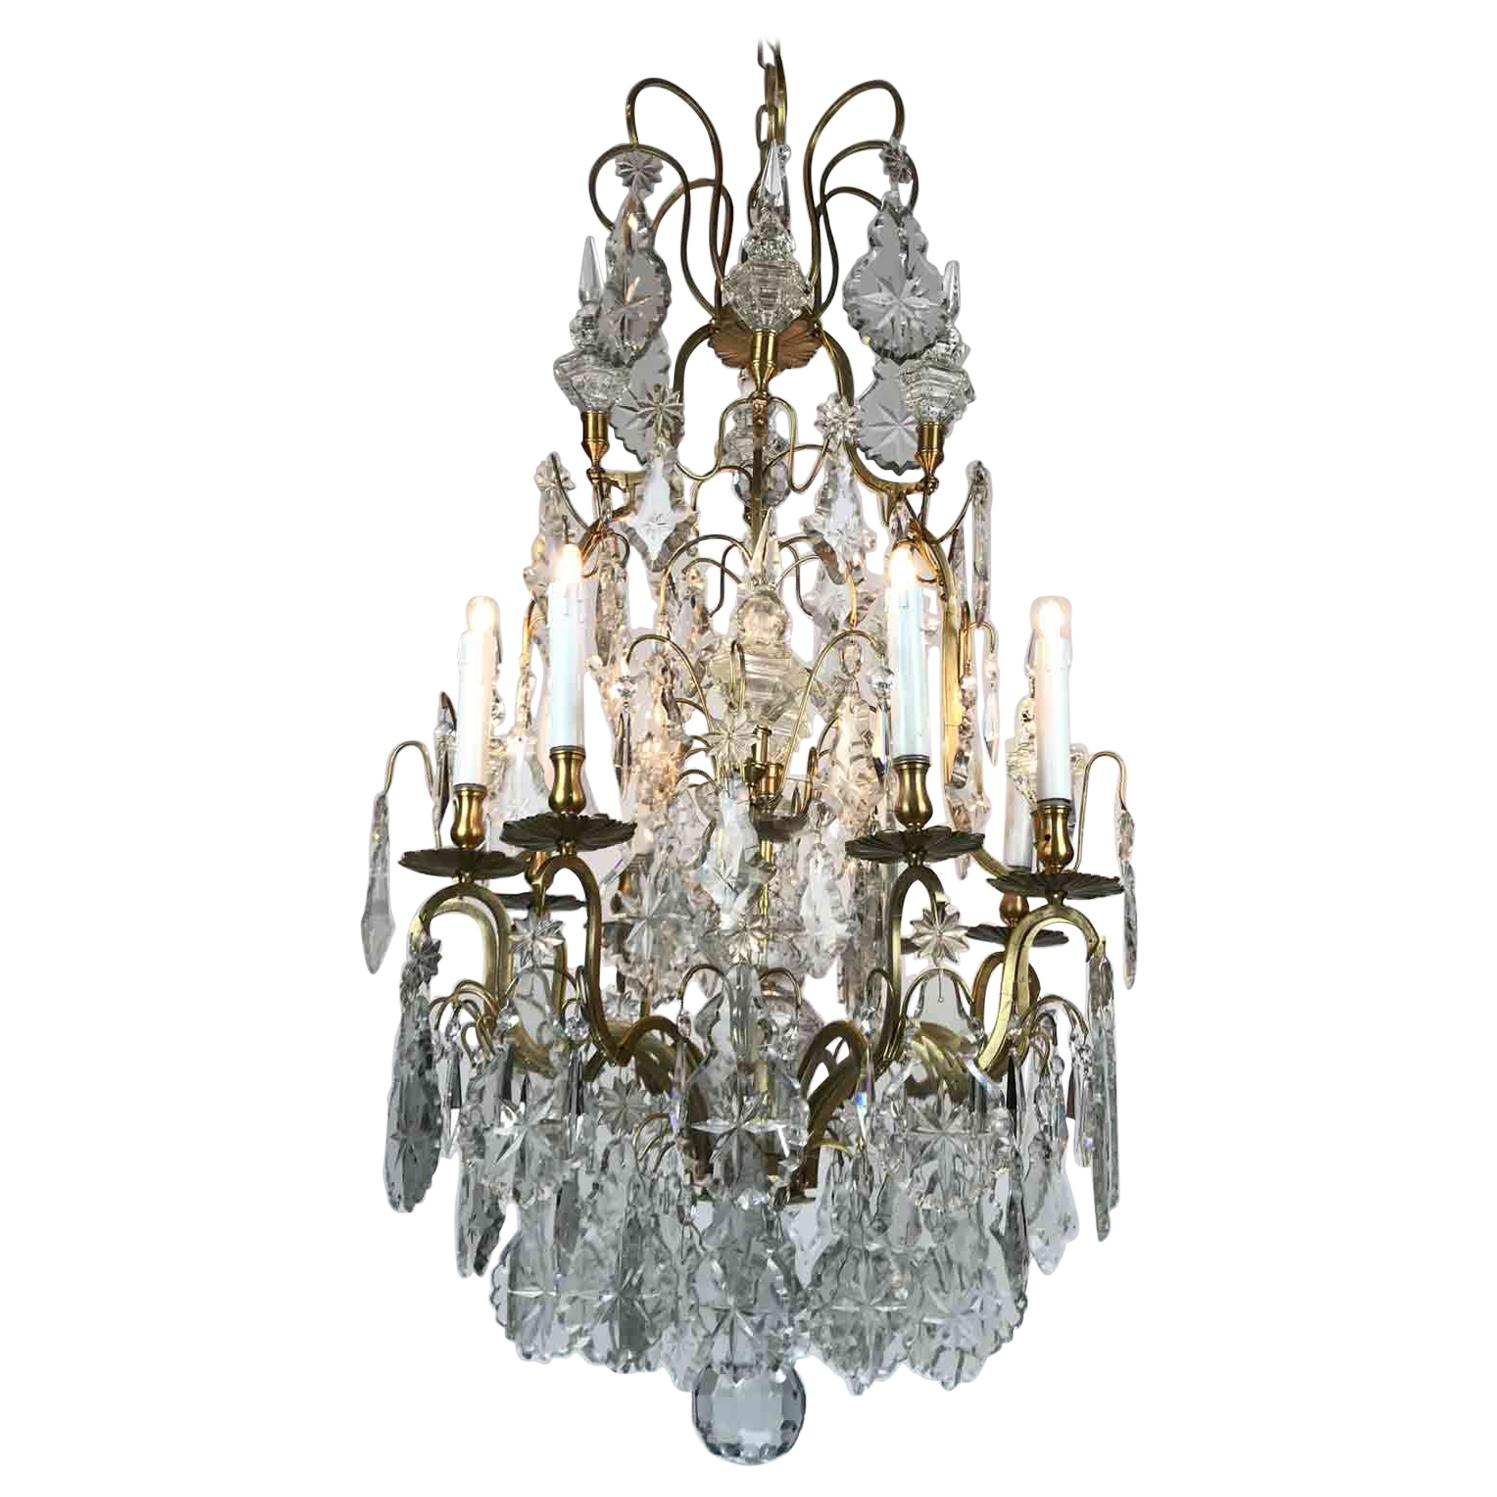 19th Century French Birdcage Chandelier Louis XV Style with Crystal Spires